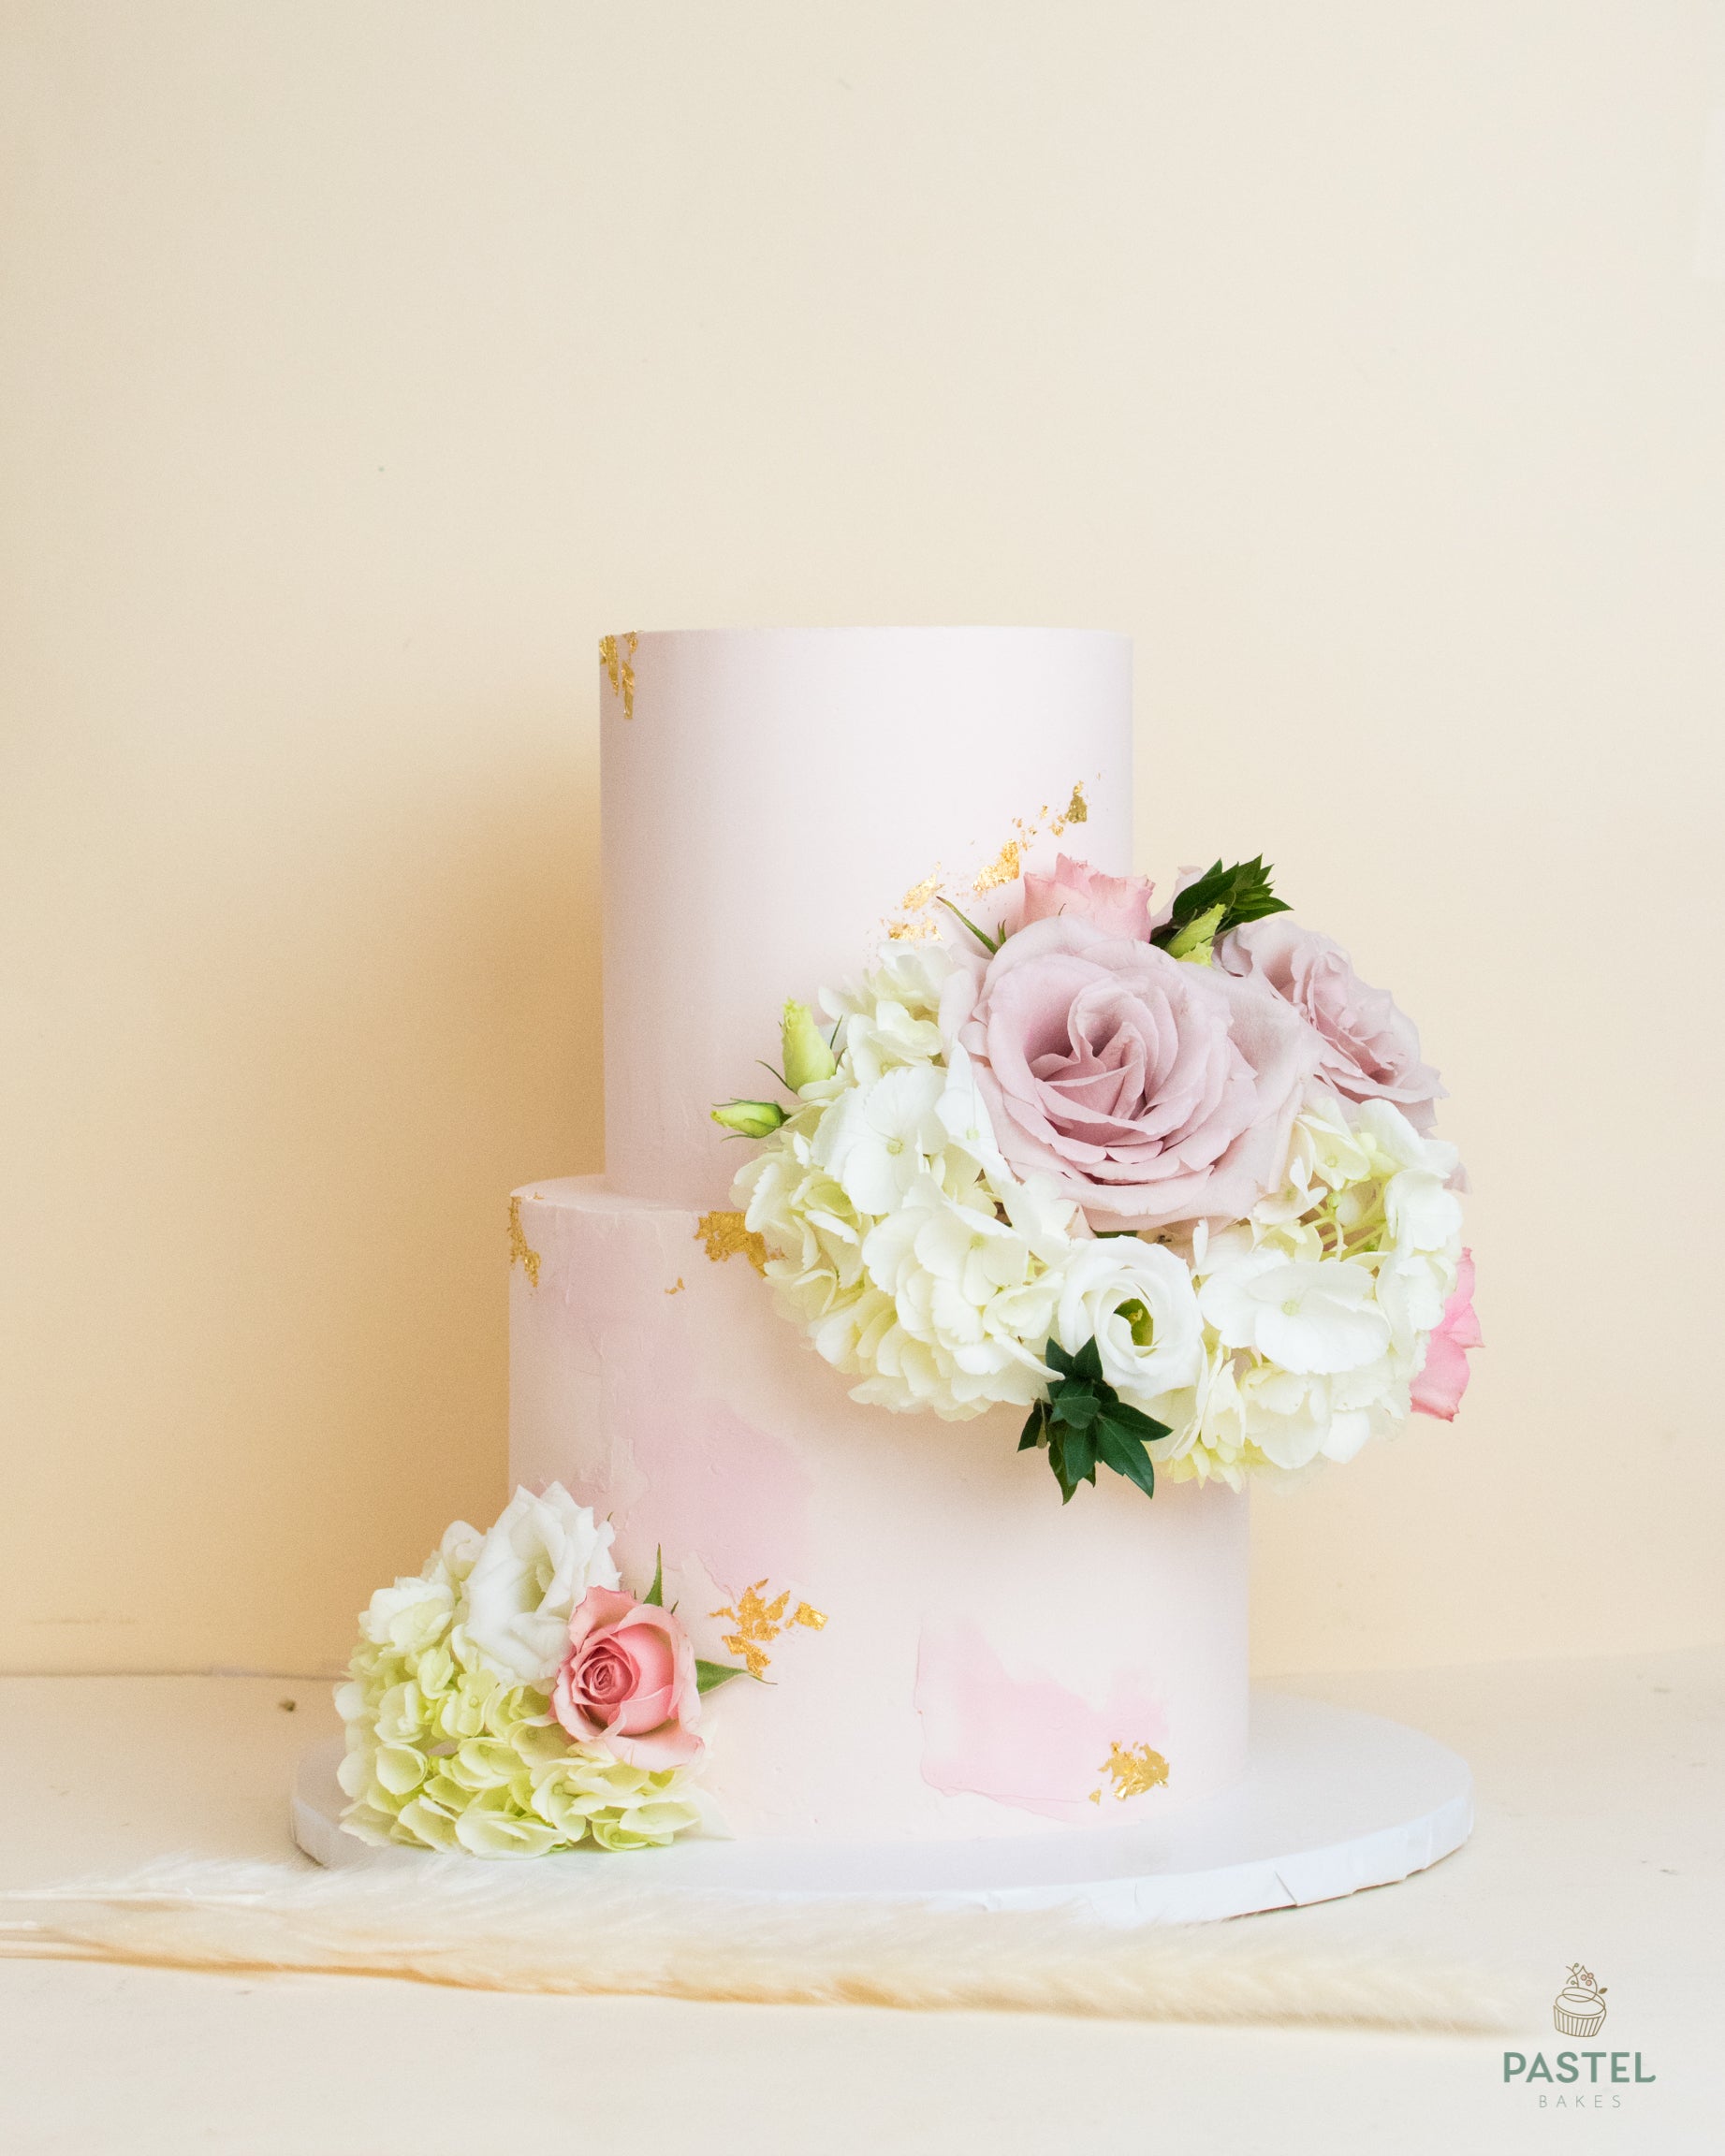 High two layers light-pink cake with decorative rose bouquet at the bottom and between layers.